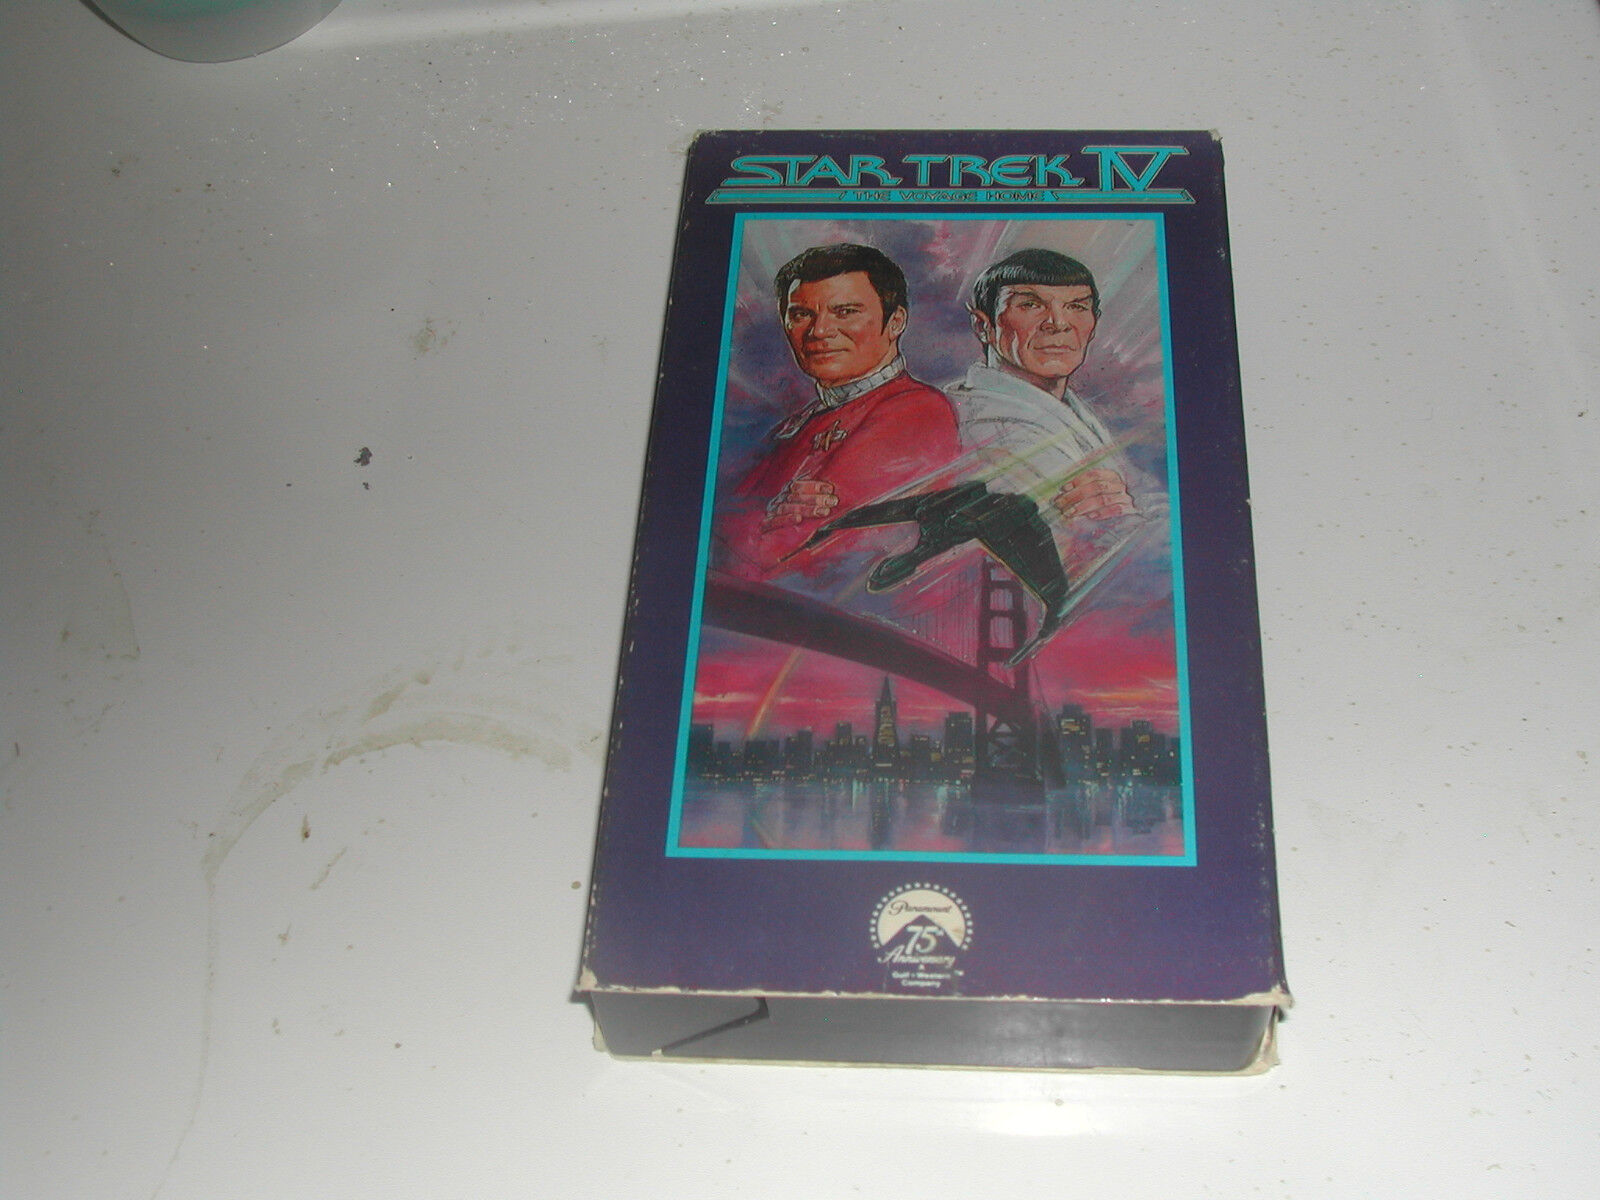 collect Vintage STAR TREK vhs tapes-STAR TREK 4 and 5-used condition/playable